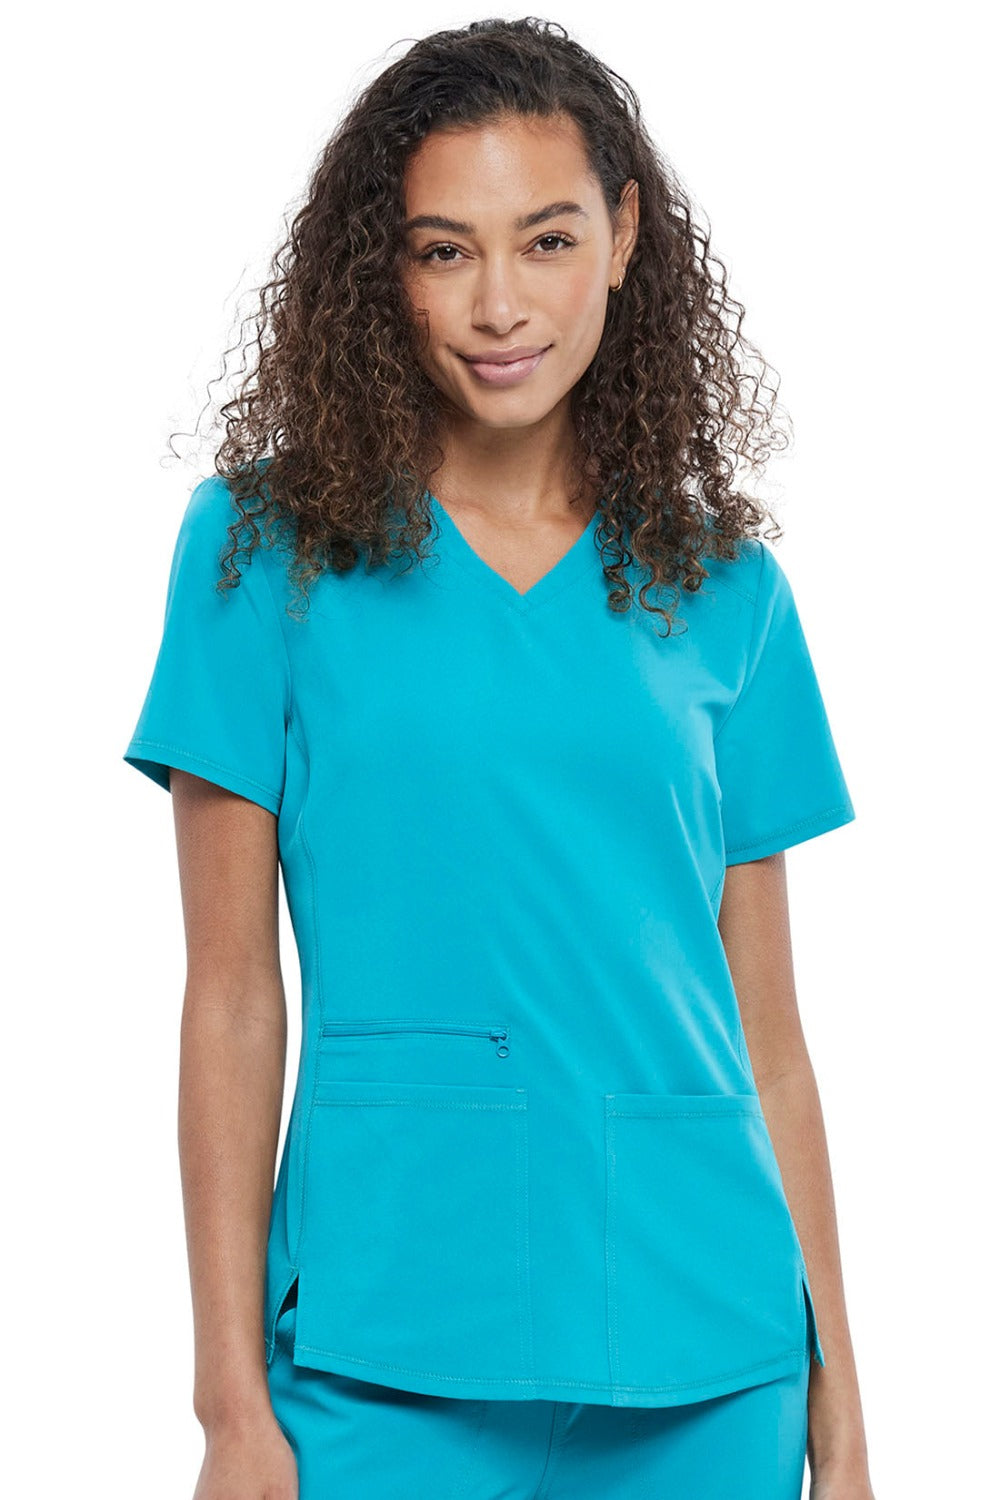 Cherokee Allura V-Neck Scrub Top in Teal Blue at Parker's Clothing and Shoes.